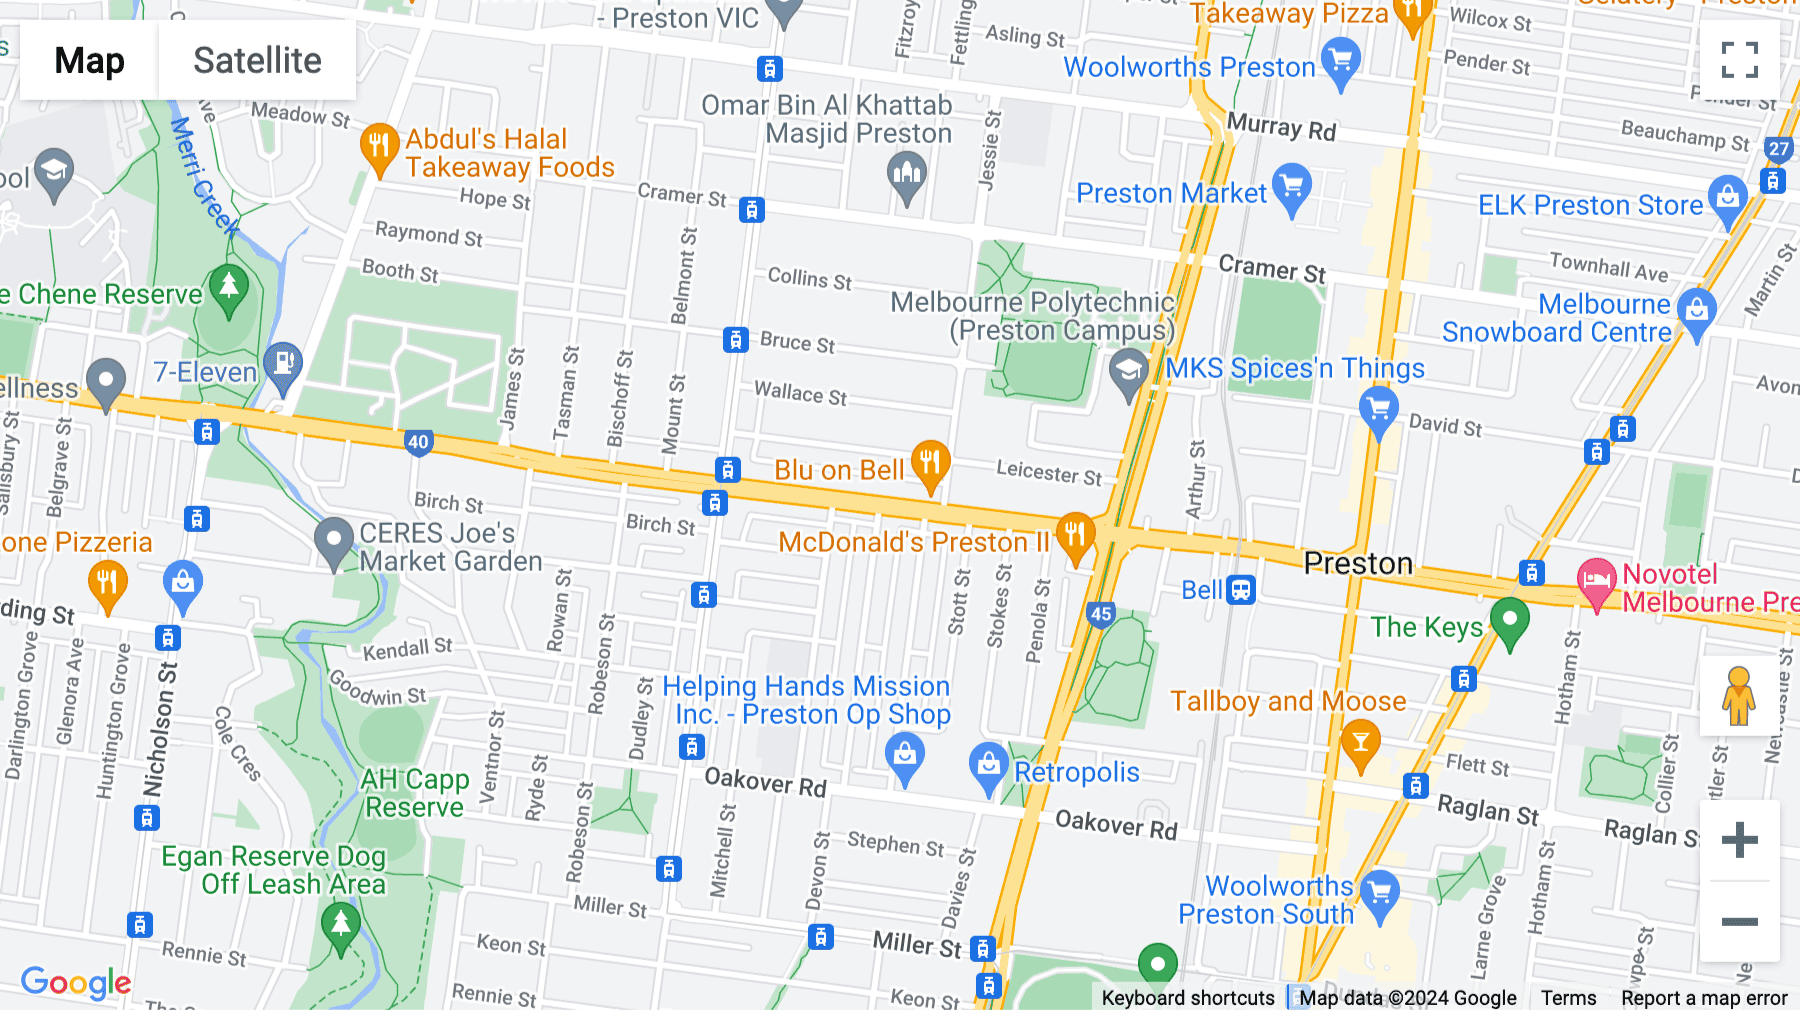 Click for interative map of Bell City Serviced Offices, Ground Floor, 215 Bell Street, Preston, Melbourne, Australia, Preston